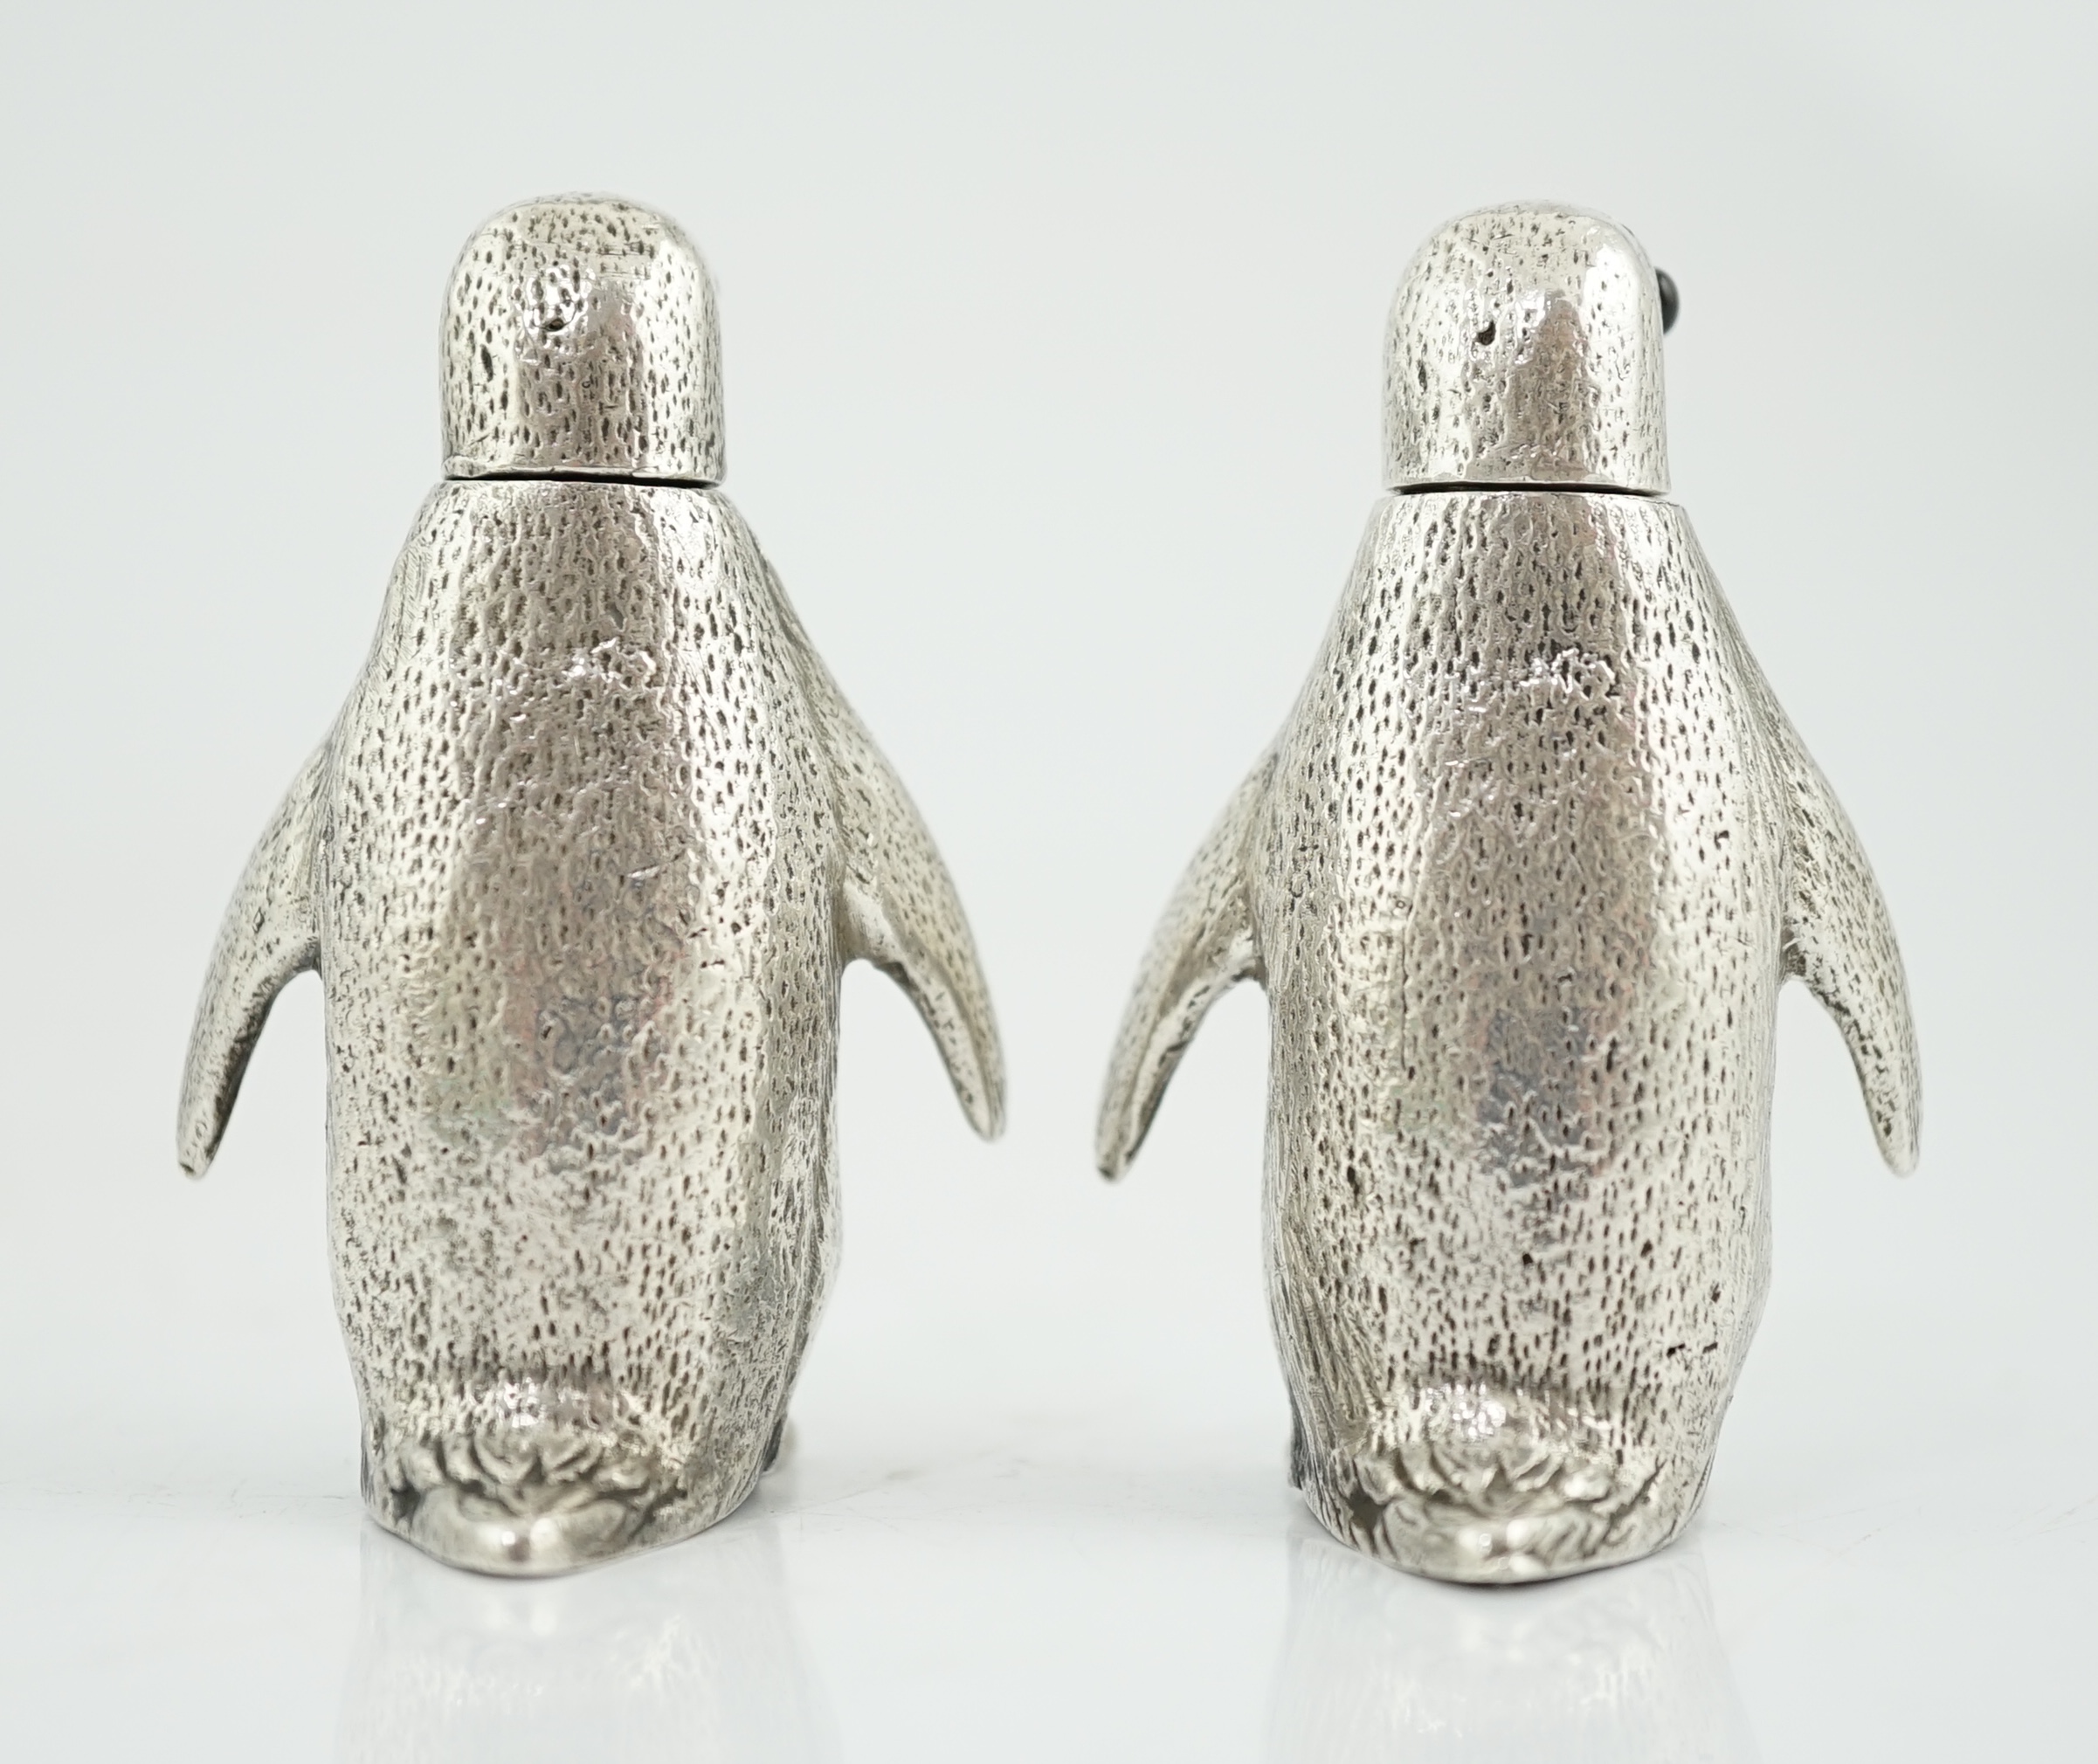 A pair of Elizabeth II silver novelty condiments, modelled as penguins, William Comyns & Sons Ltd